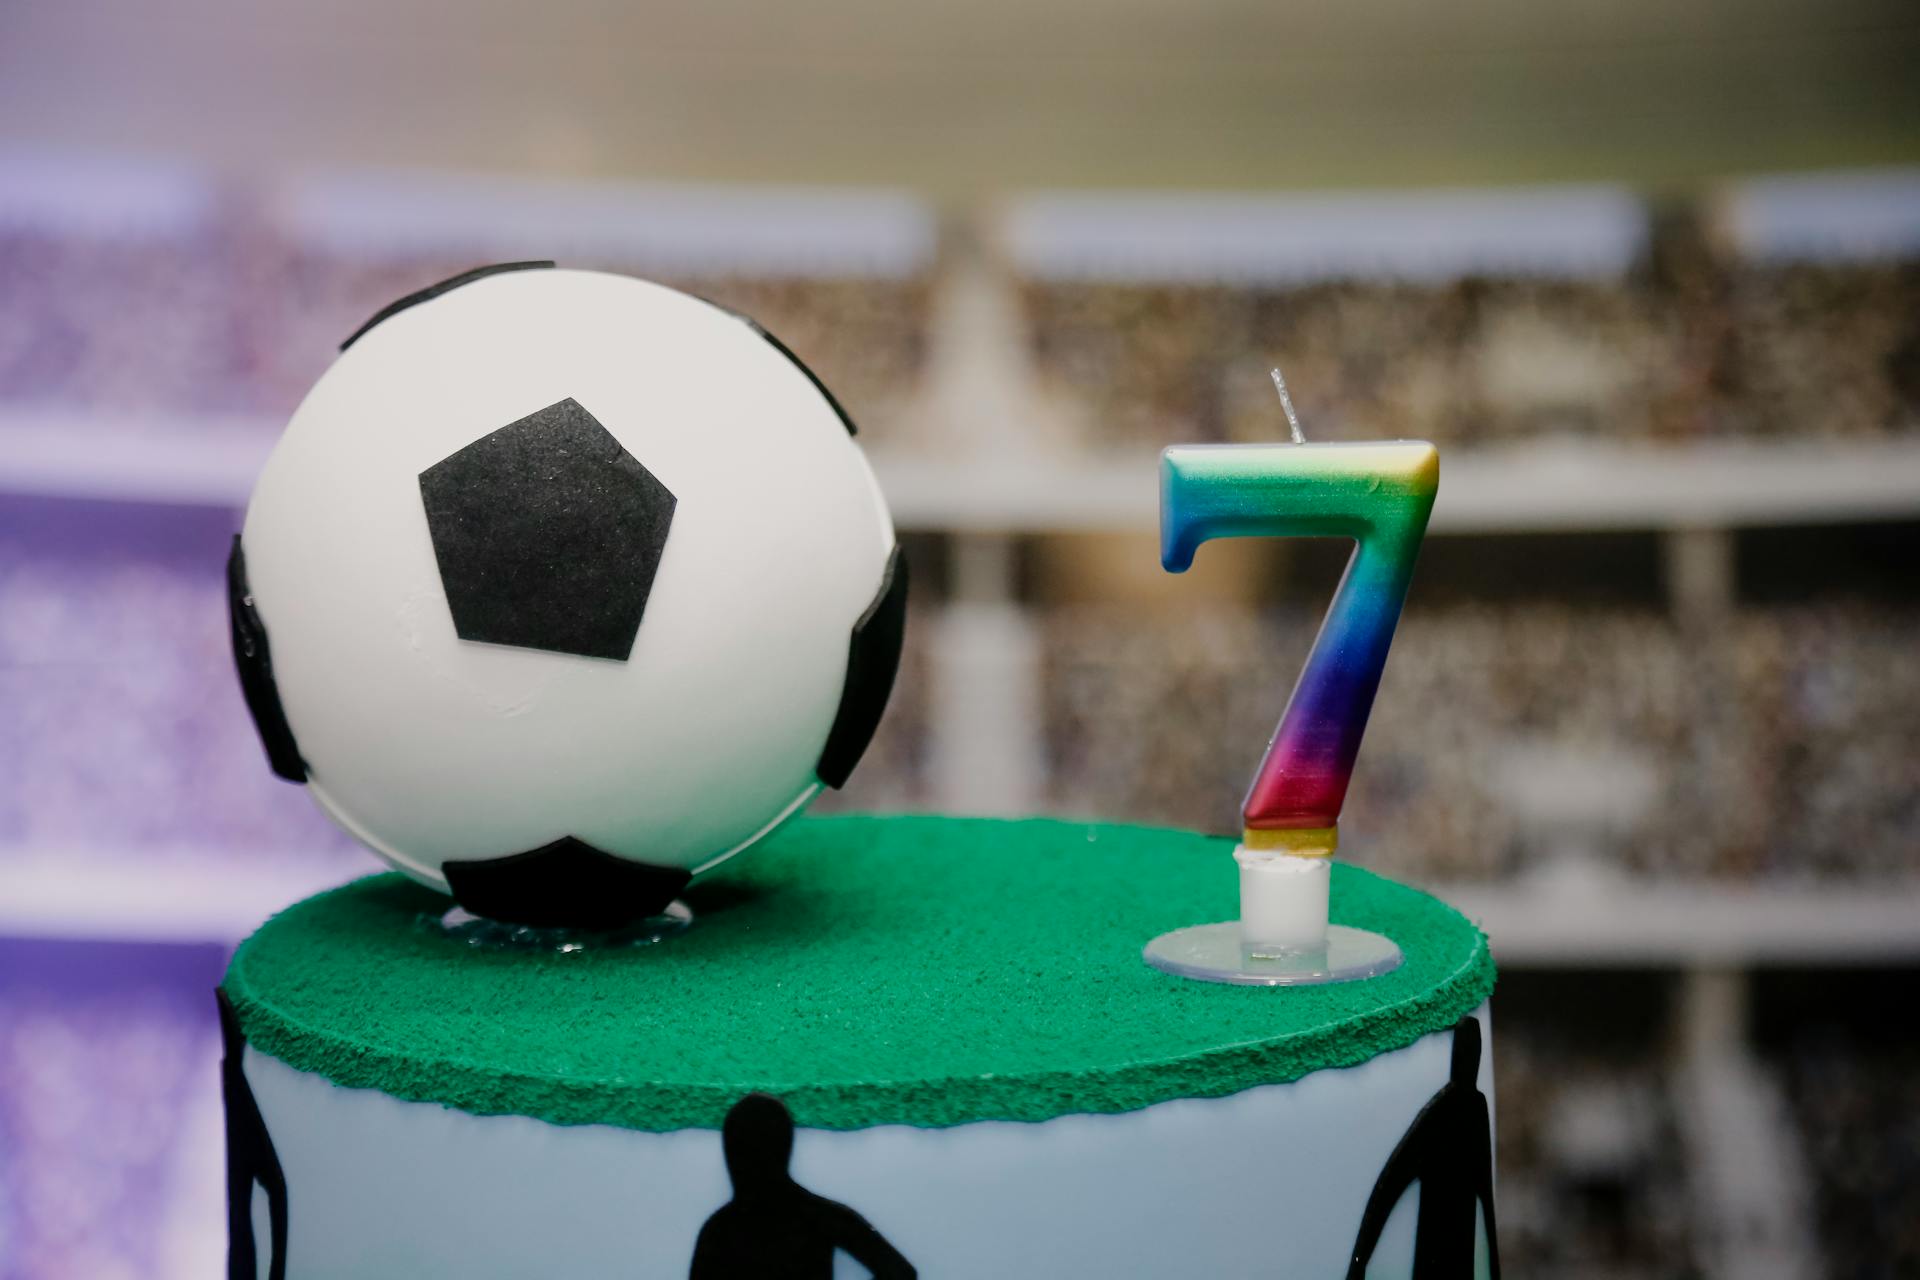 A 7th birthday cake with a soccer ball on top | Source: Pexels